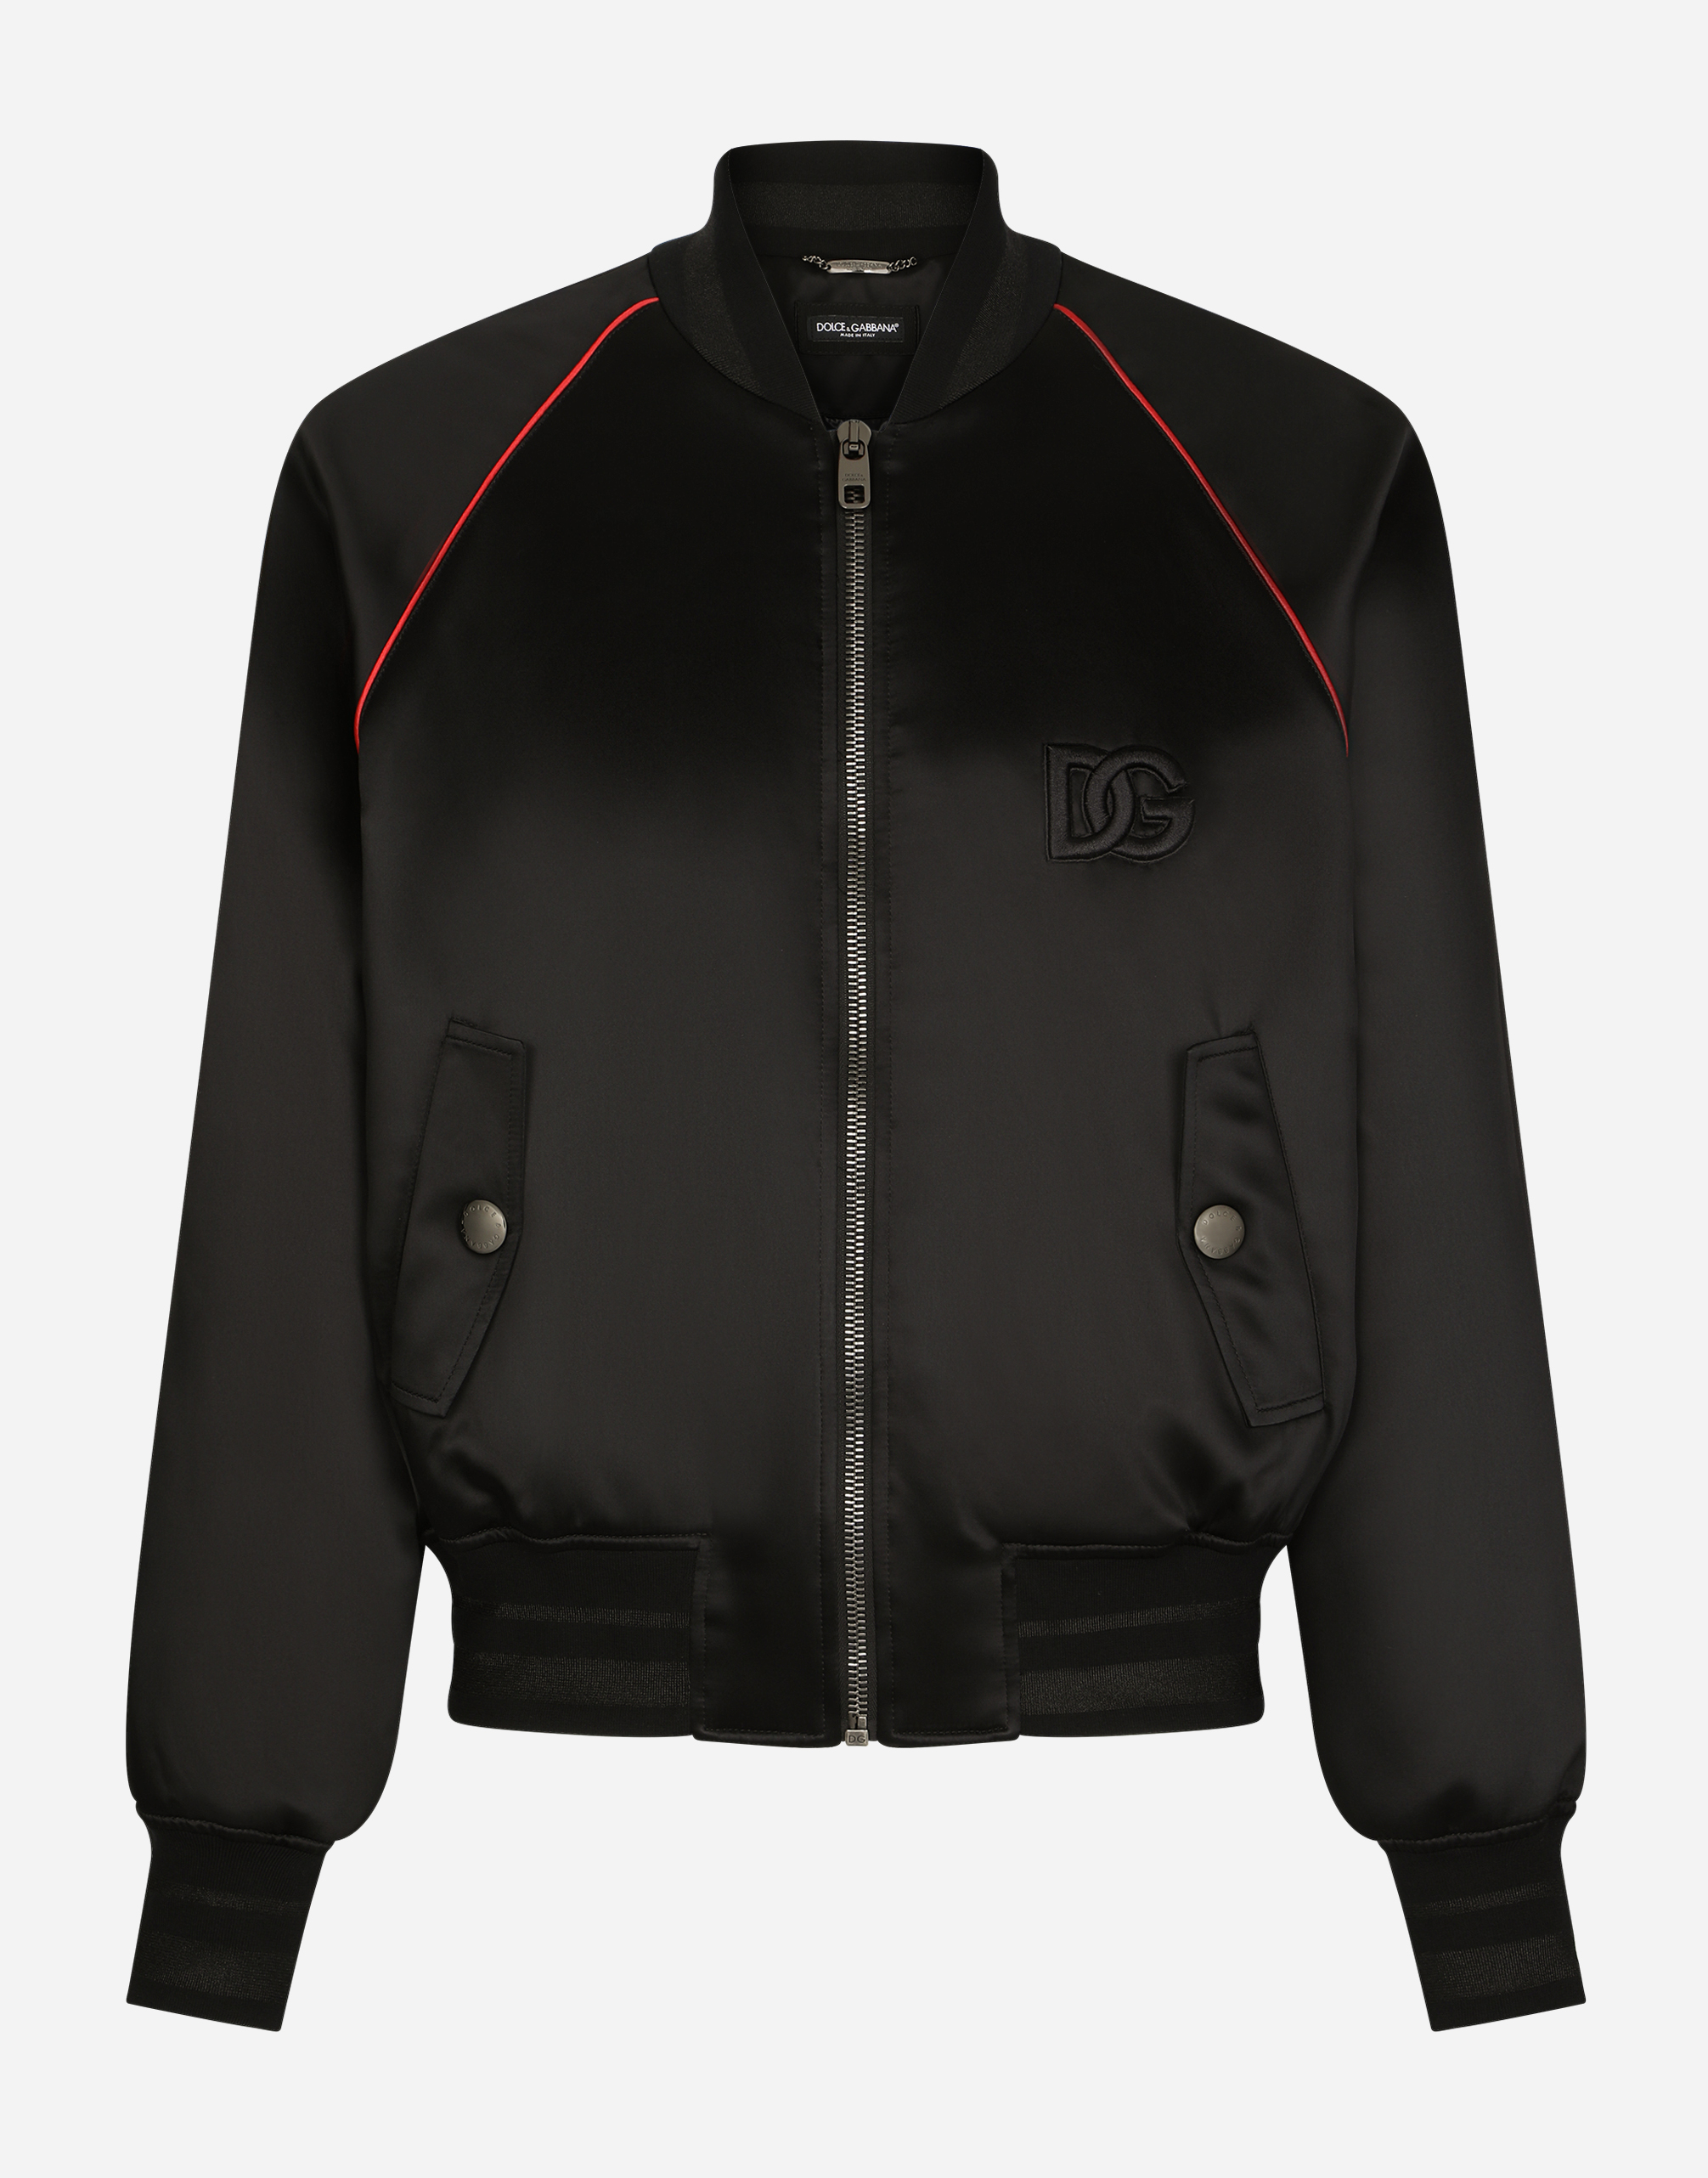 Satin jacket with embroidered DG patch in Black